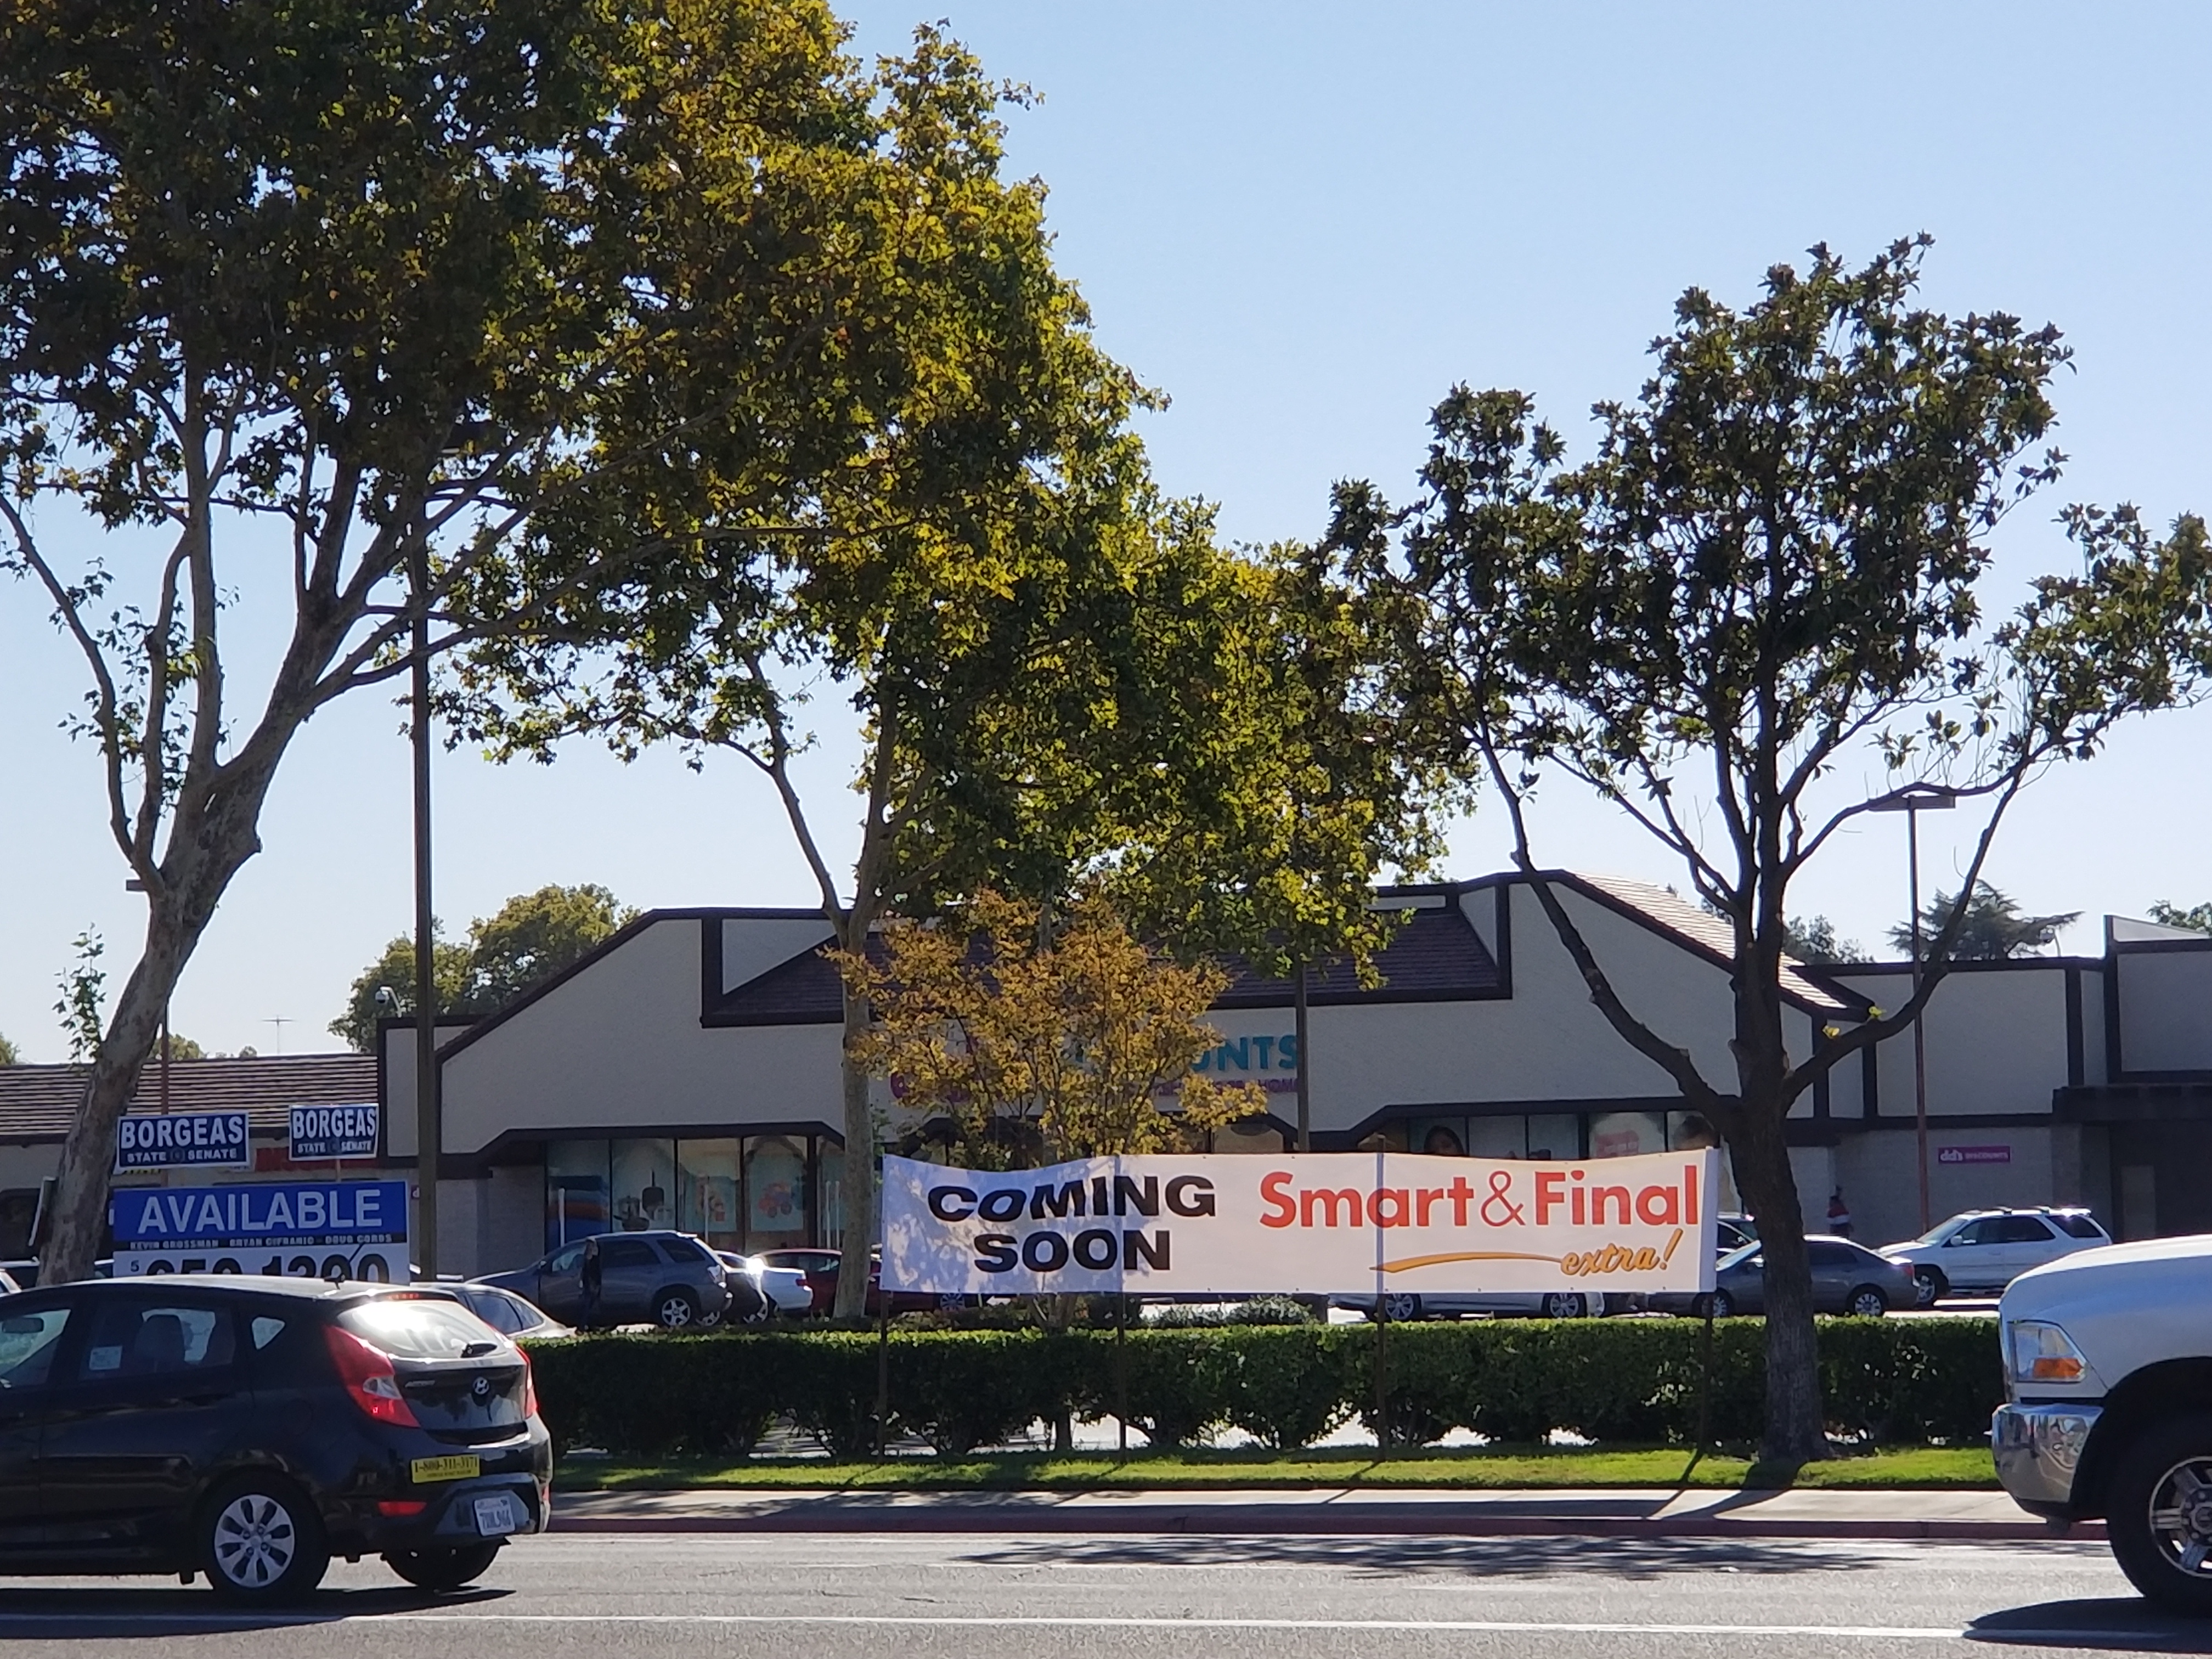 New Smart & Final store coming soon to a city near you!